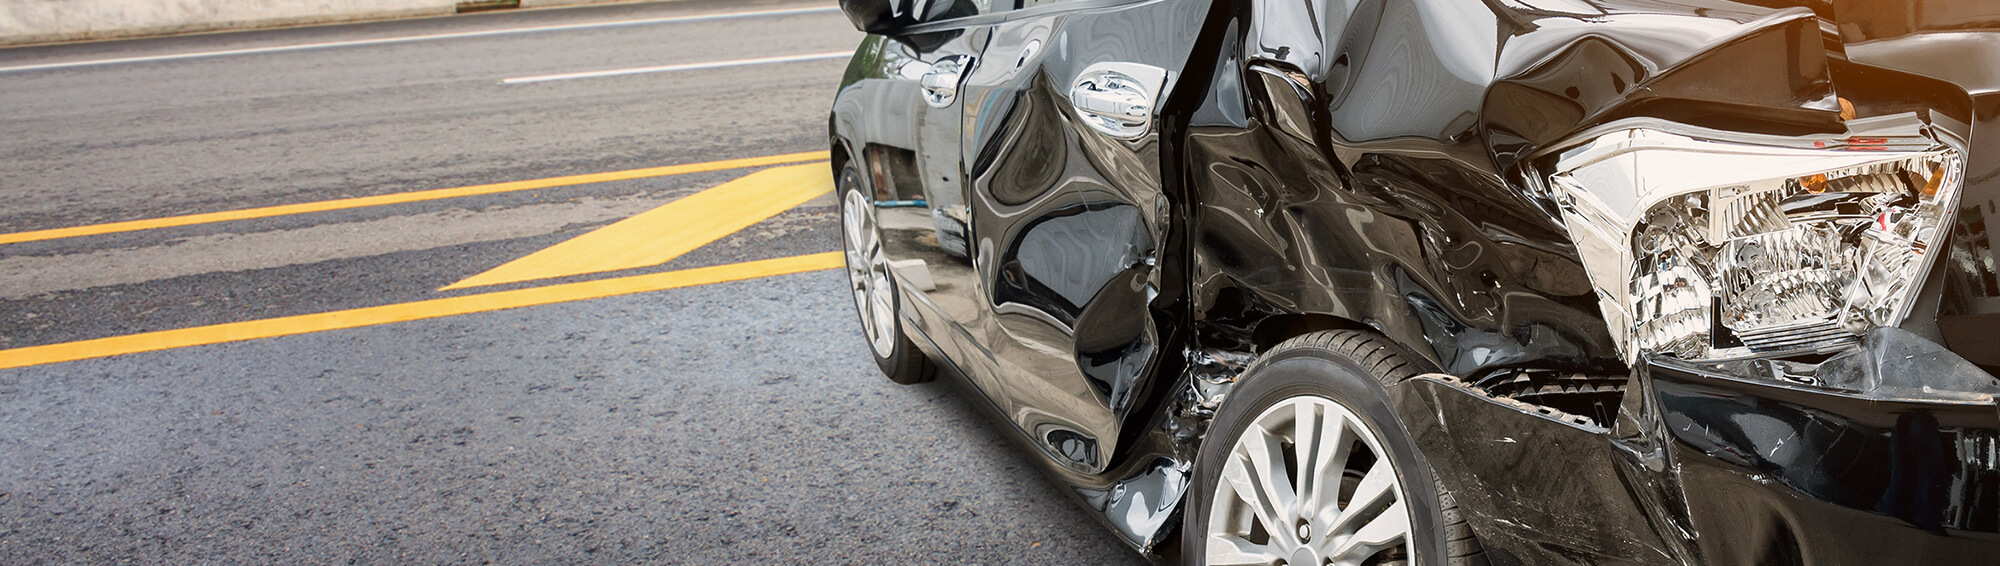 Do You Know the 3 Most Dangerous Driving Behaviors?